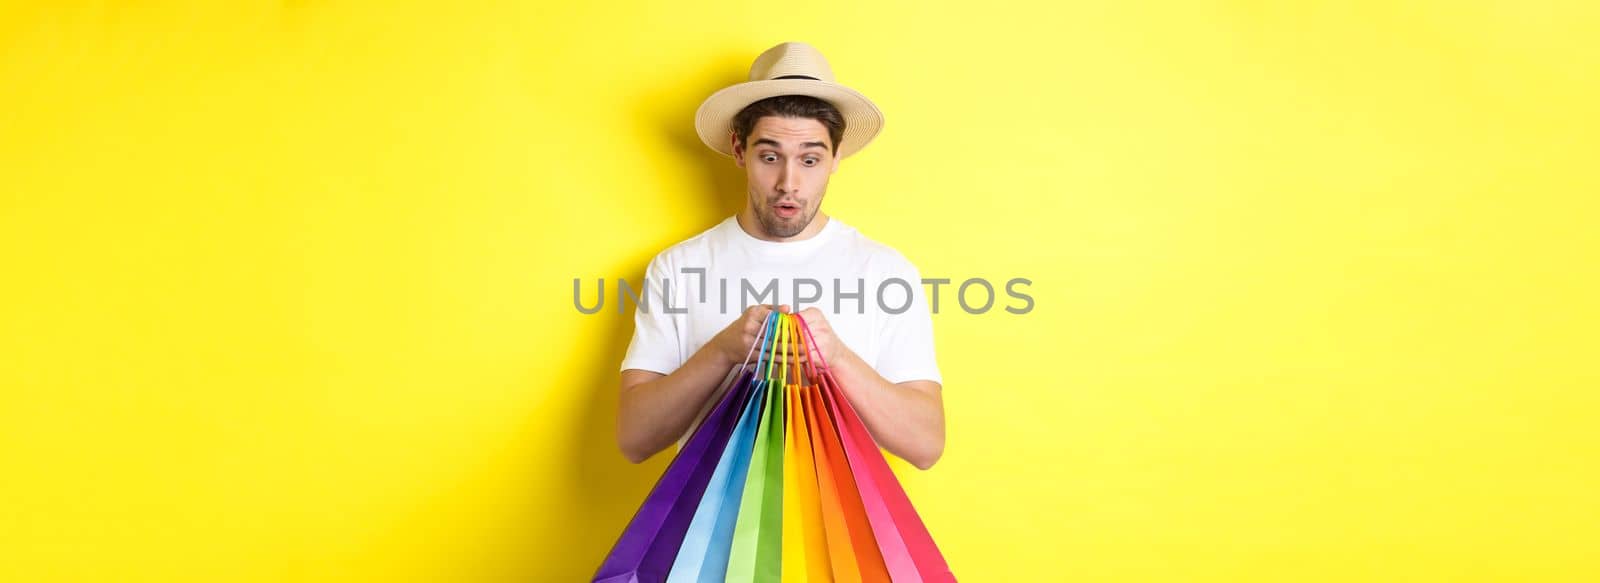 Happy man looking surprised at shopping bags, buying souvenirs on vacation, standing over yellow background.